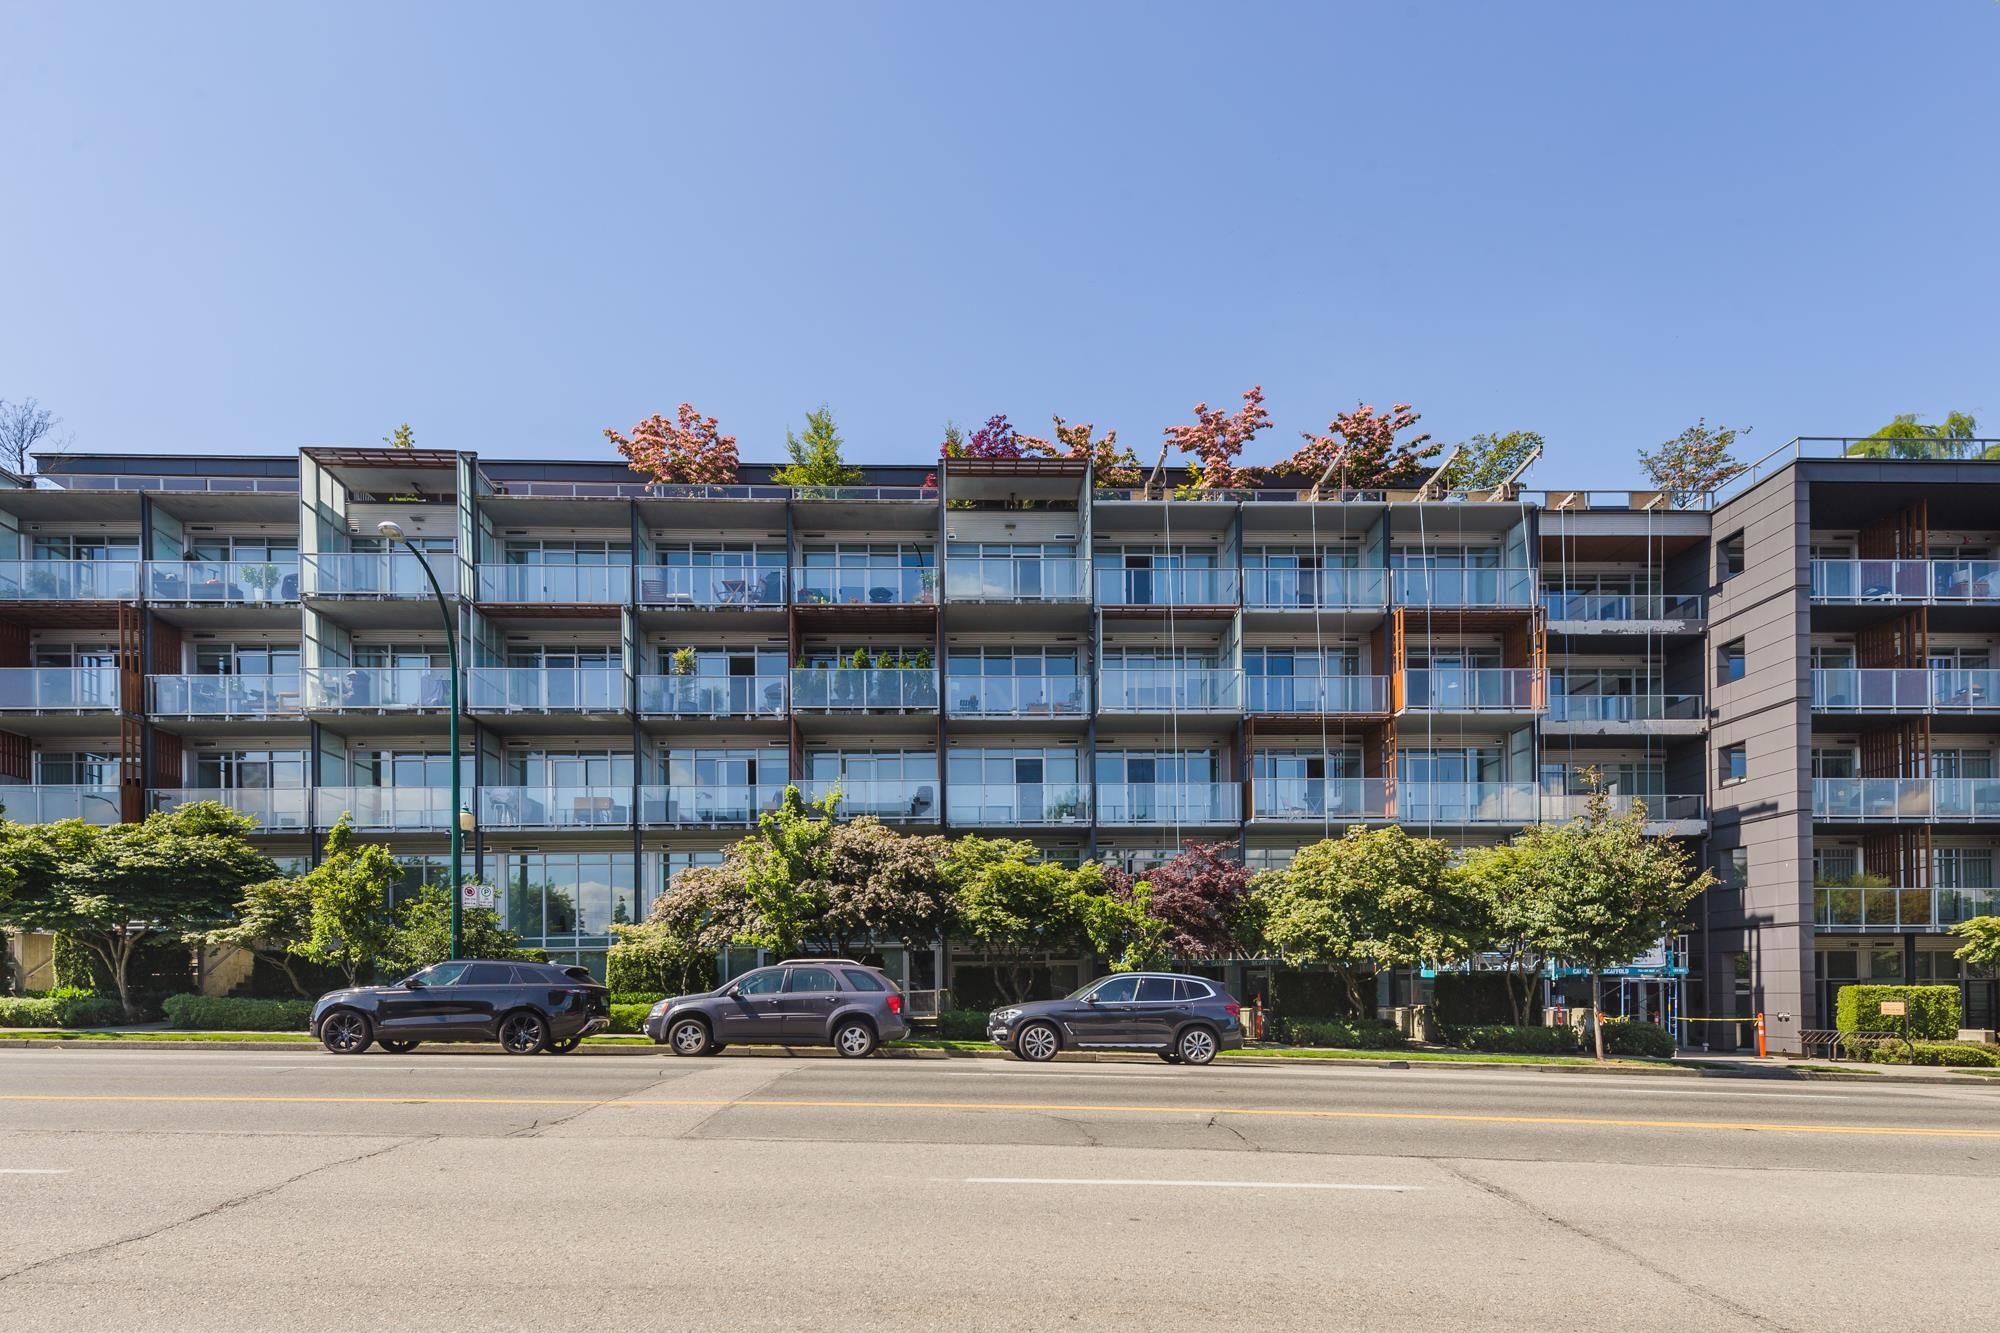 Congratulations to my sellers on the sale of their 1 bedroom suite at The Jacobsen building in Mount Pleasant and also to the new buyers who already live in the buildi